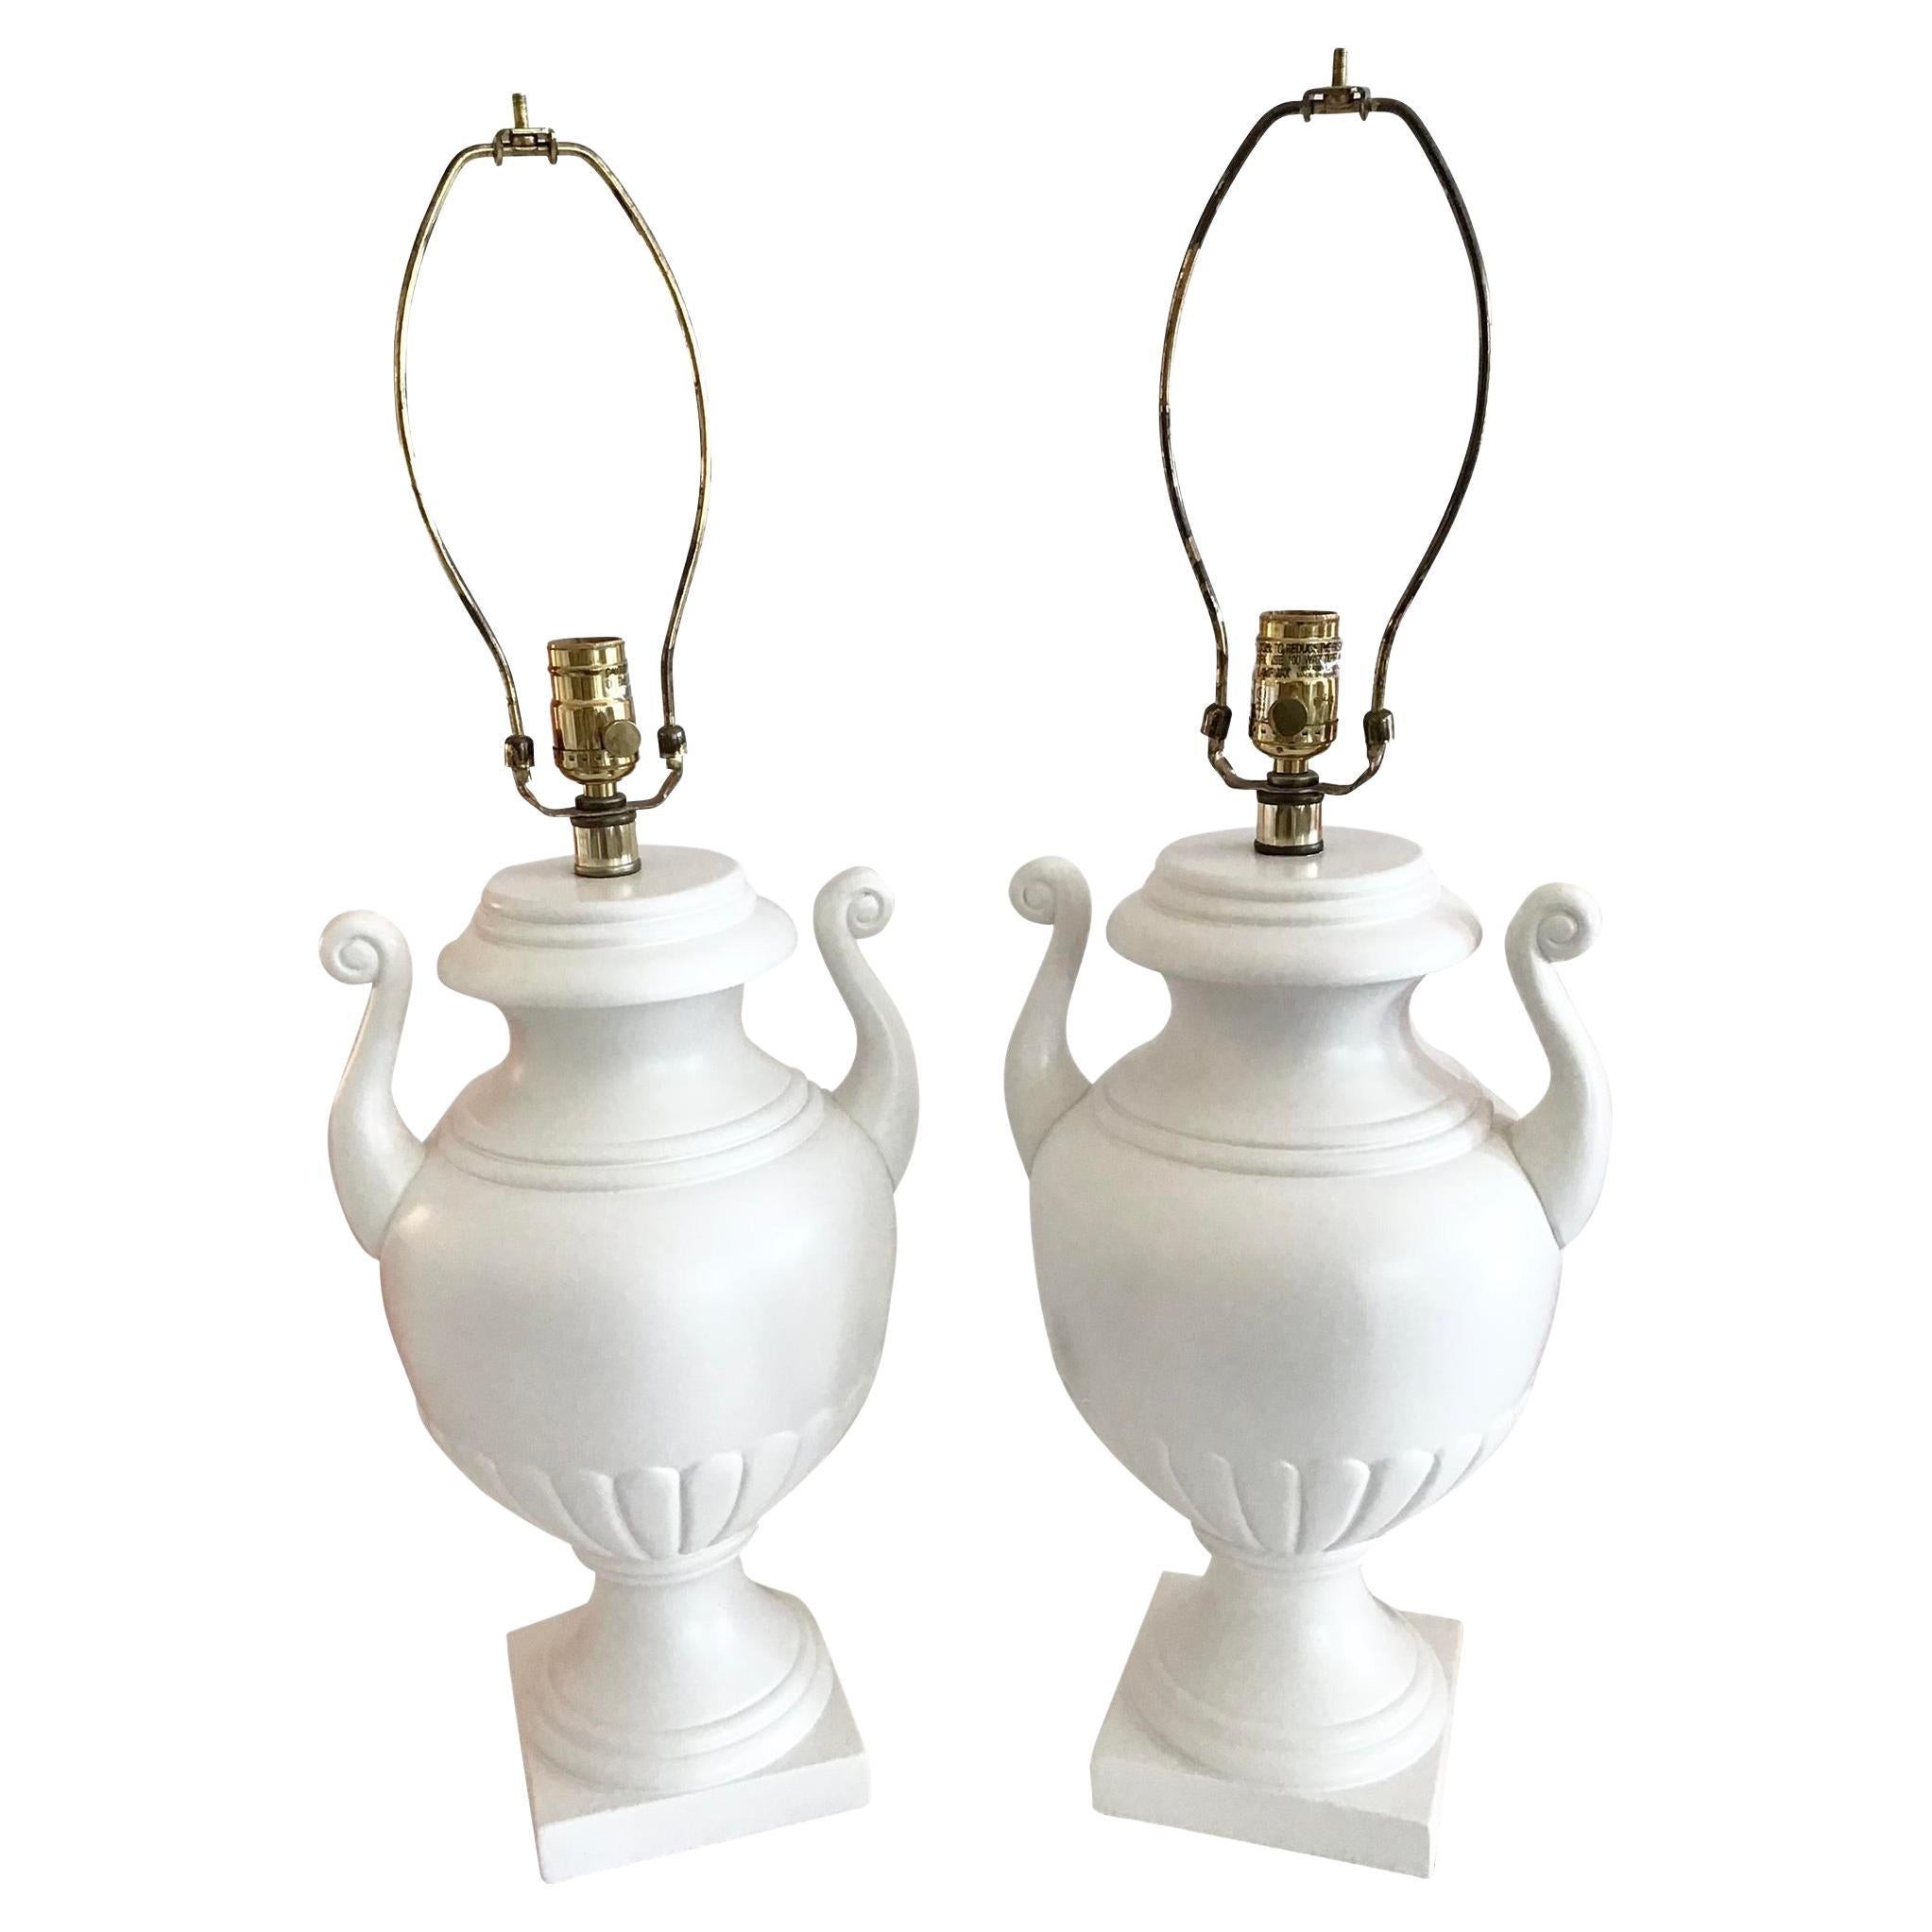 Todd Hase White Urn Table Lamps, a Pair For Sale